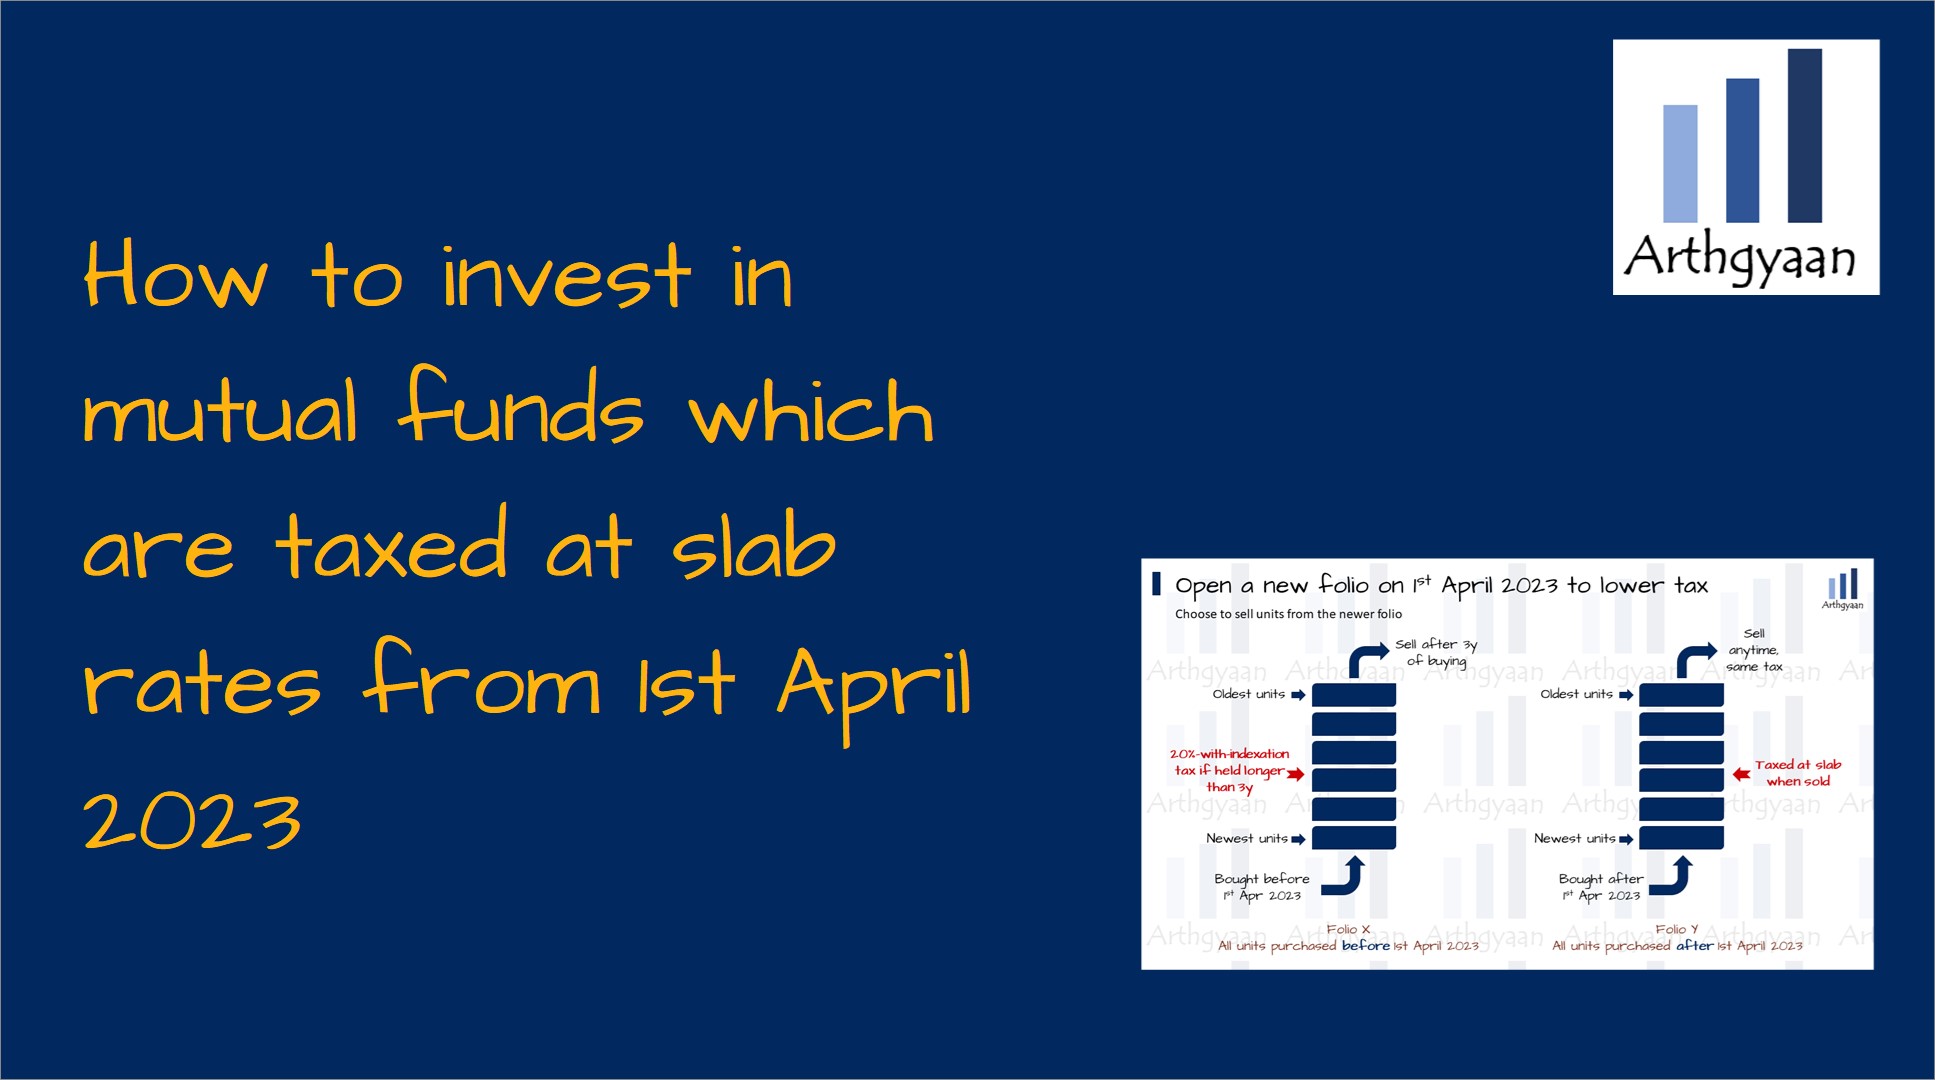 How to invest in mutual funds which are taxed at slab rates from 1st April 2023